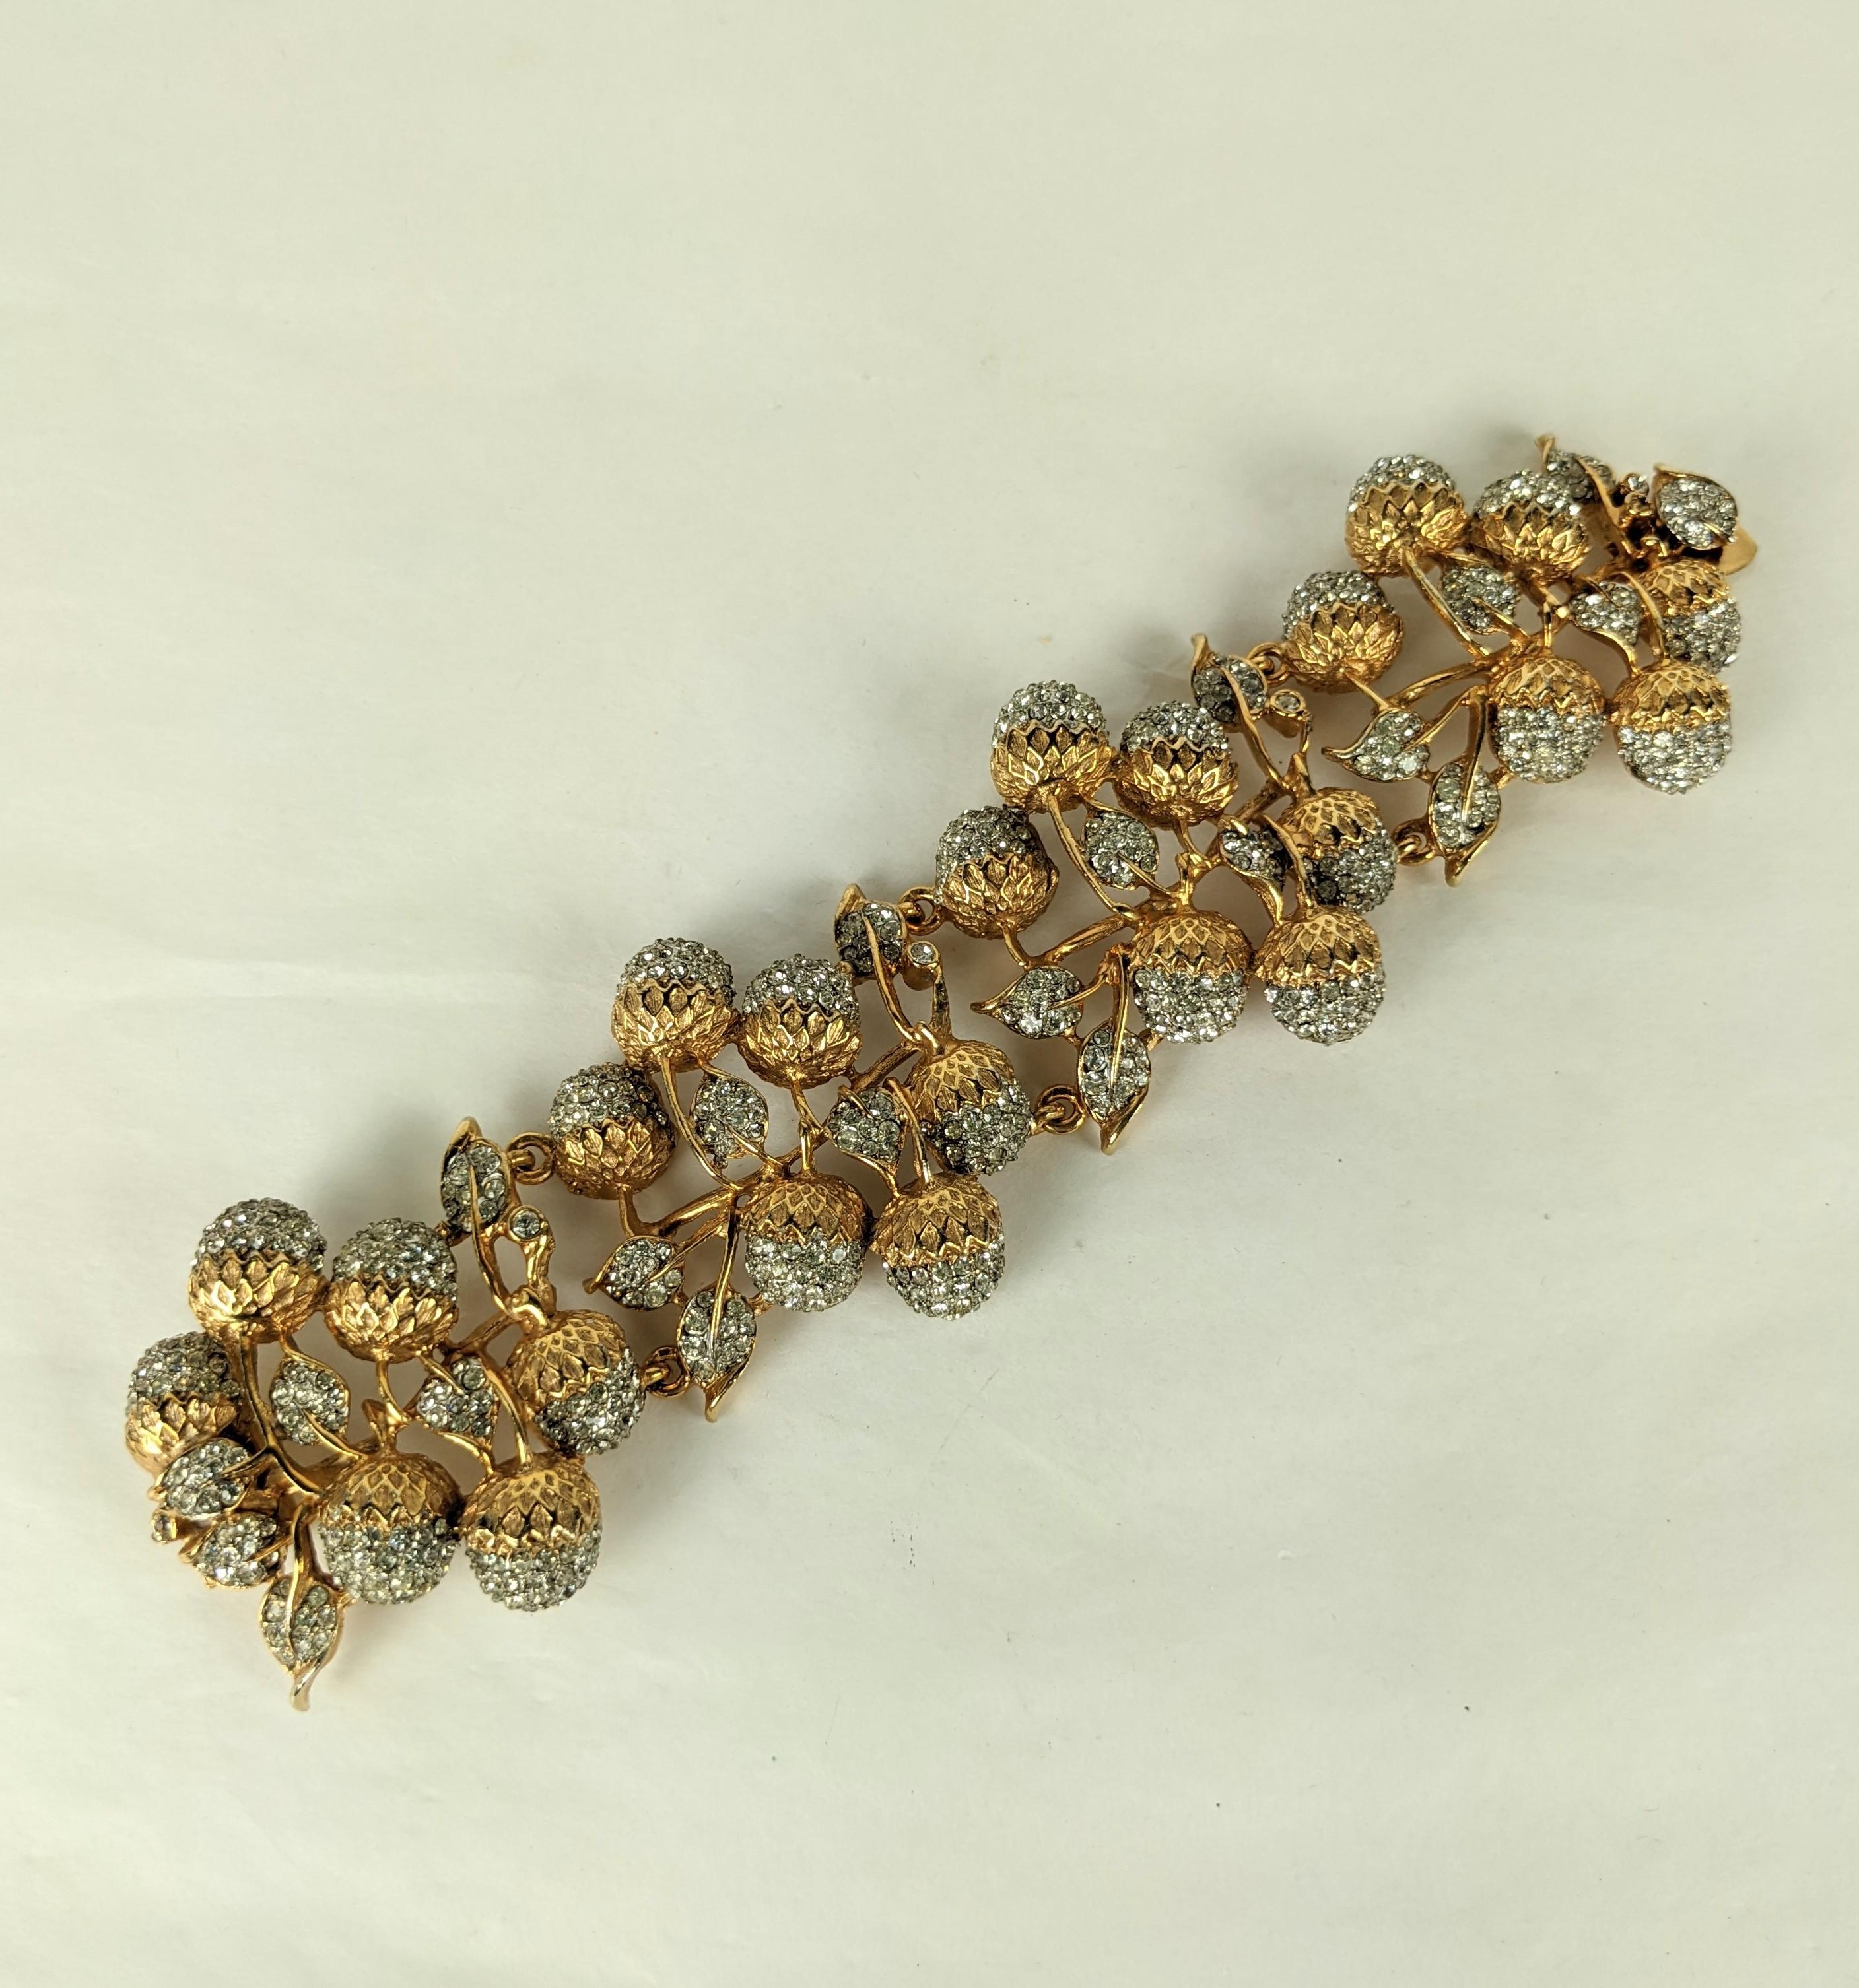 Exceptional, early K.J.L Pave Acorn Link Cuff from the 1960's made in the Schlumberger style. Wide with 4 large links of pave acorns with gilt caps and leaves. 7